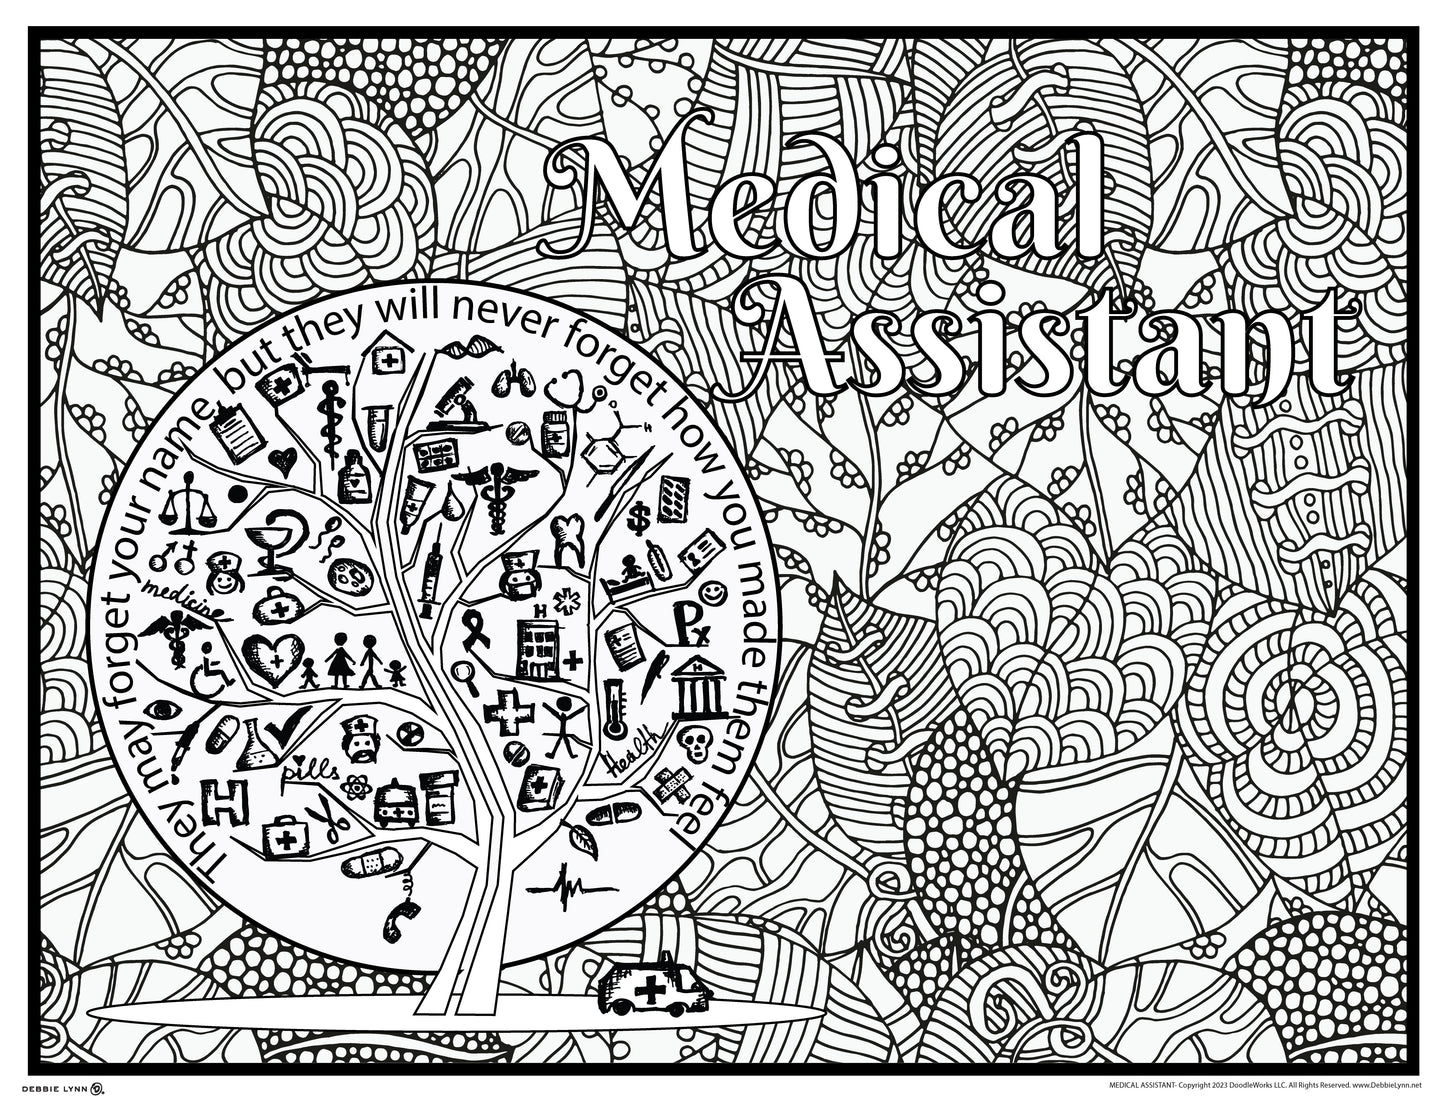 Medical Assistant Personalized Giant Coloring Poster 46"x60"